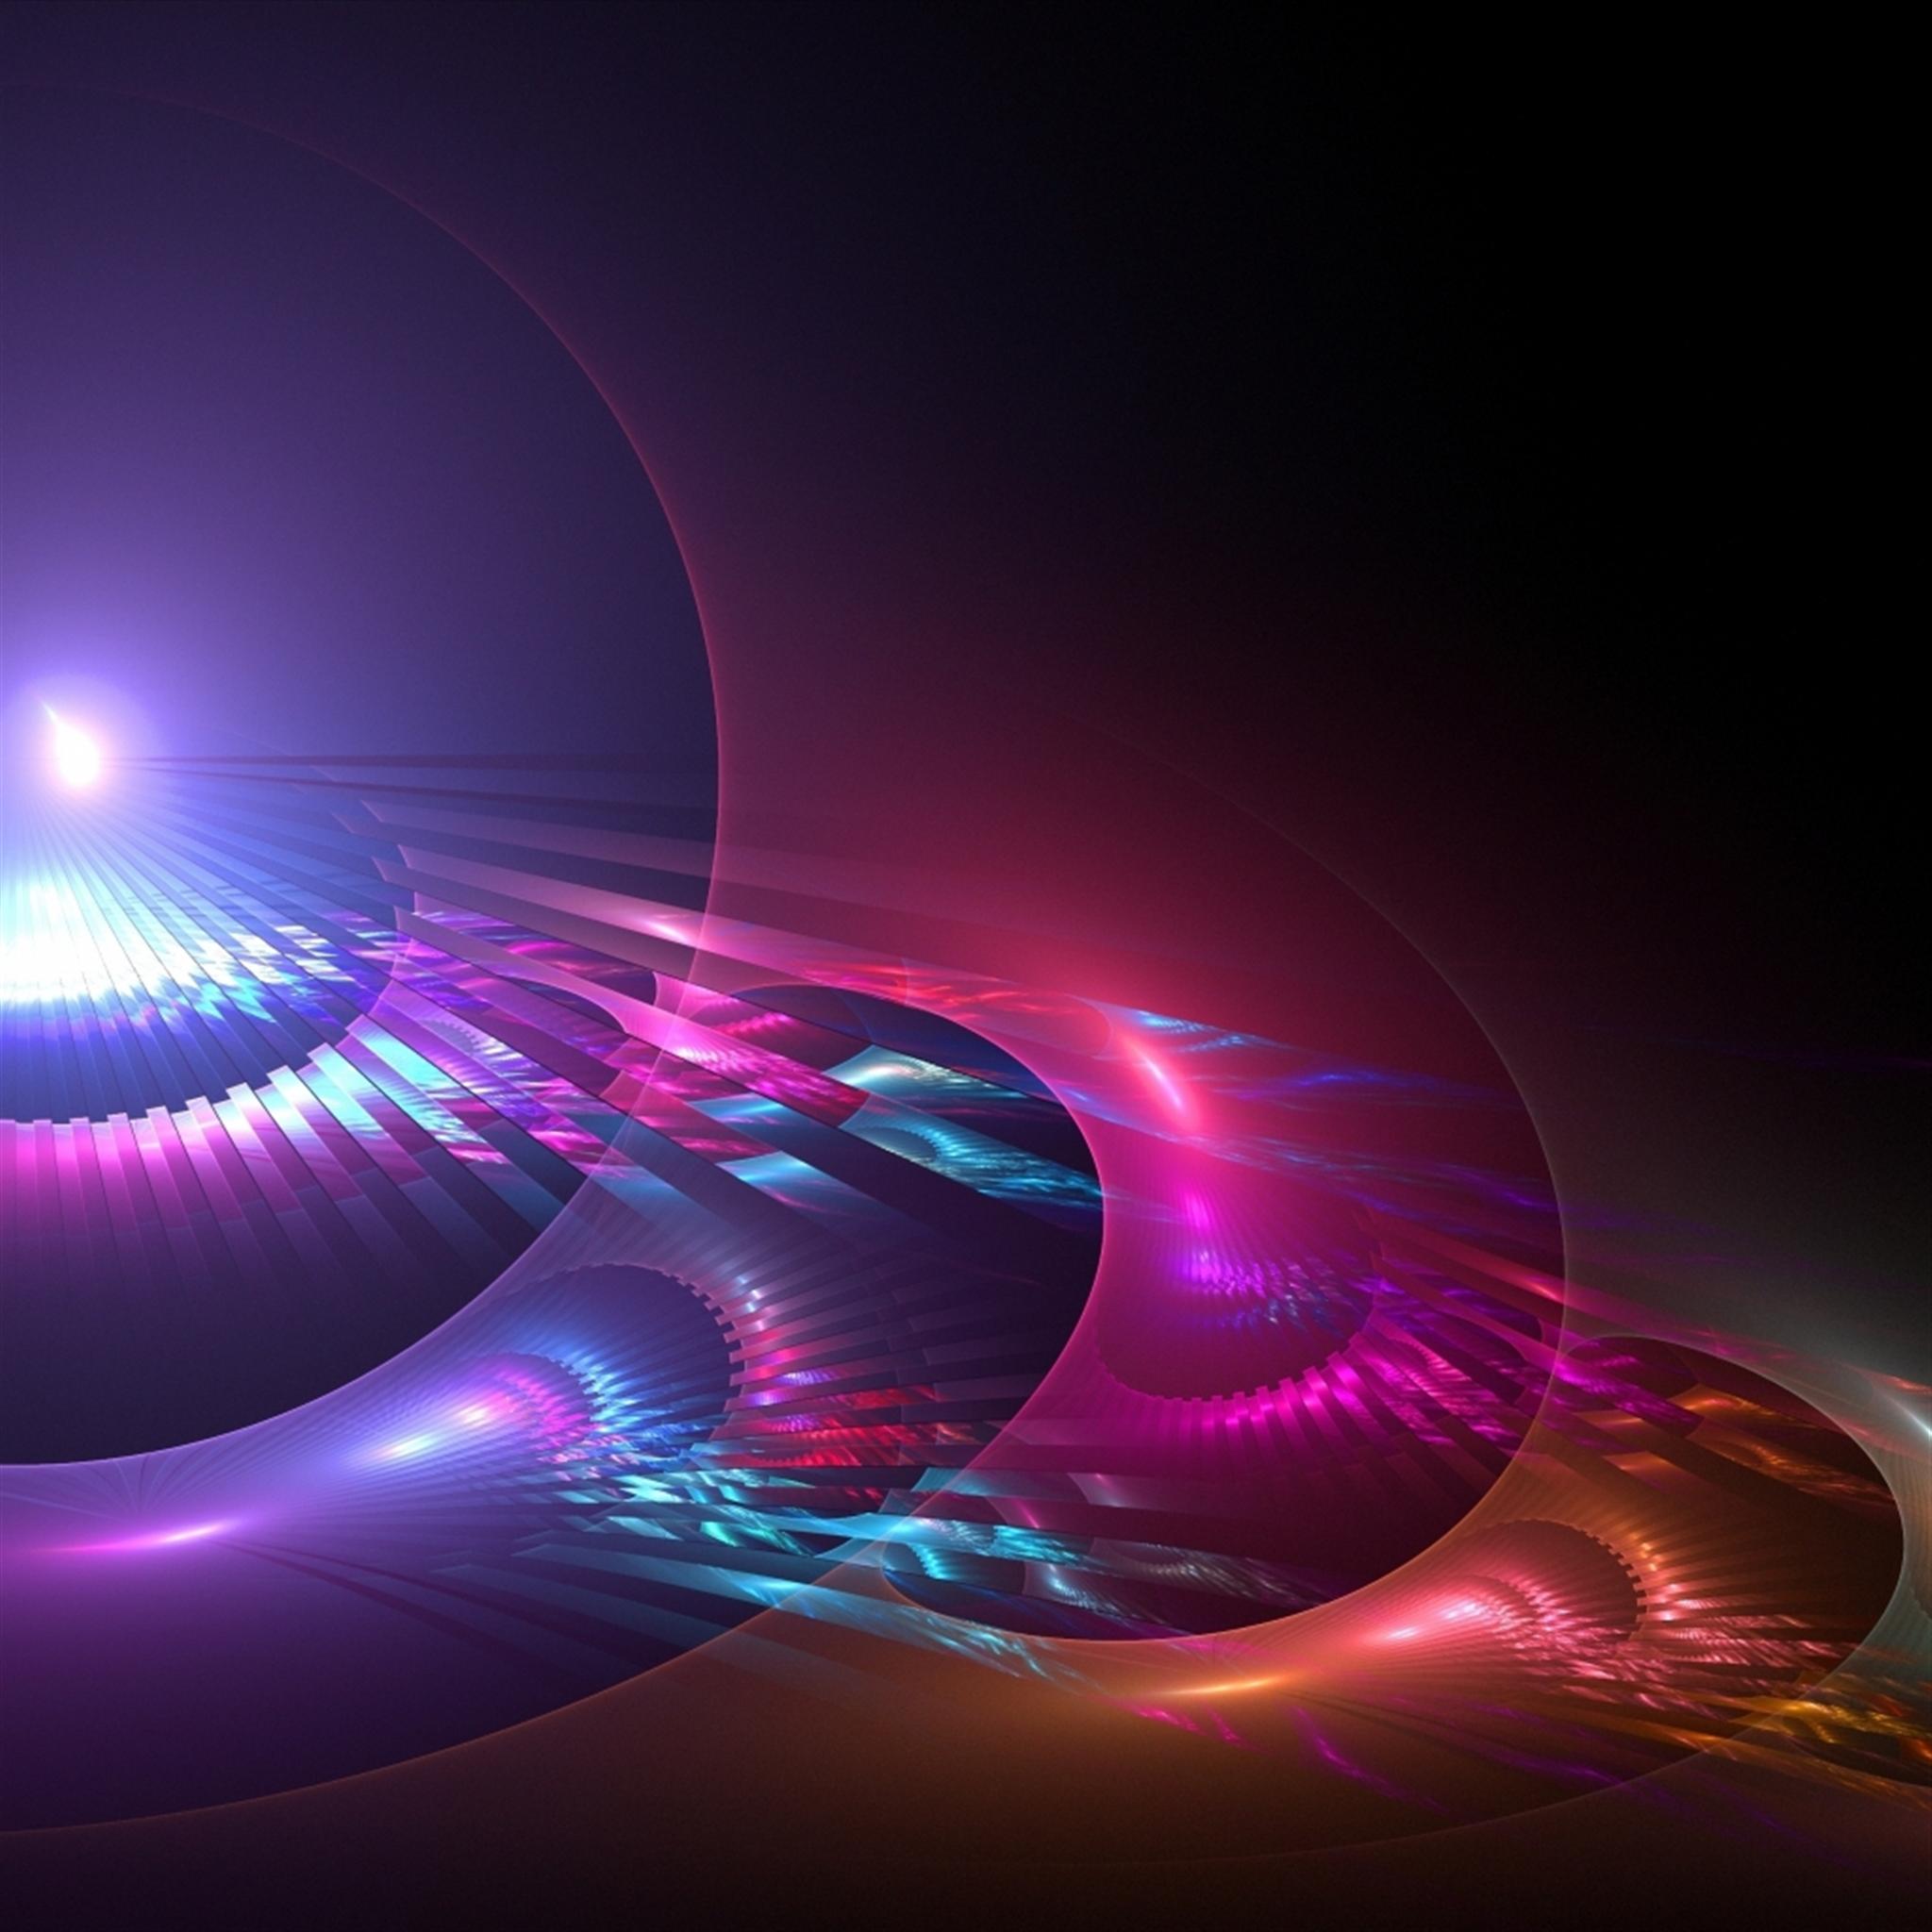  abstract love flower ipad 3d hd wallpapers 3d ipad 2 Car Pictures